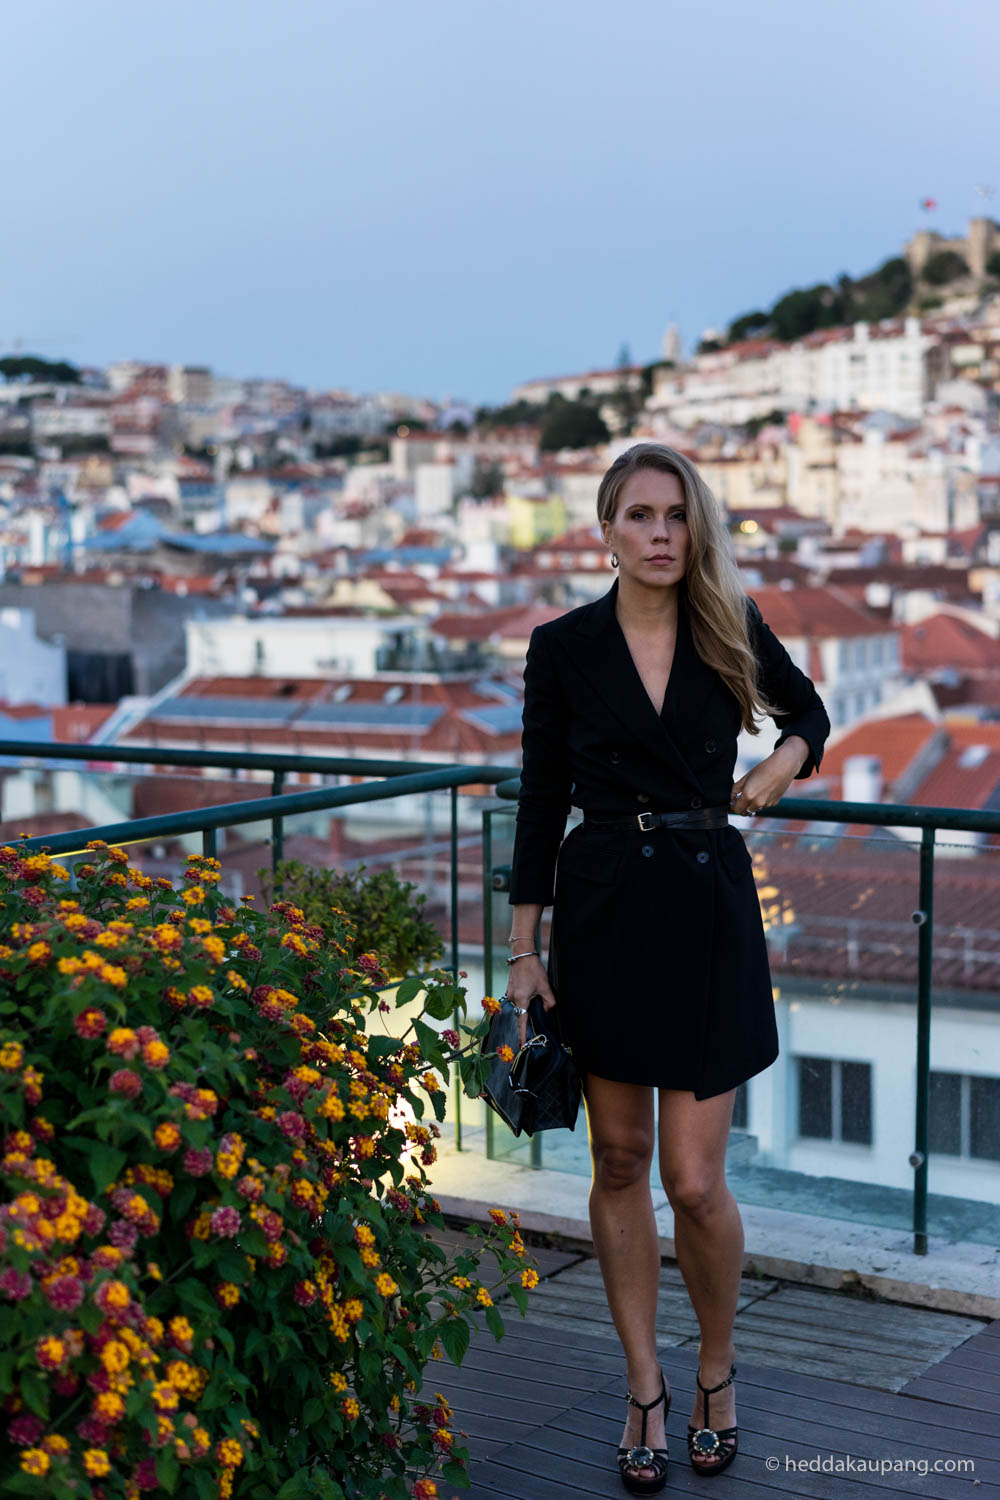 Rooftop view in Lisbon